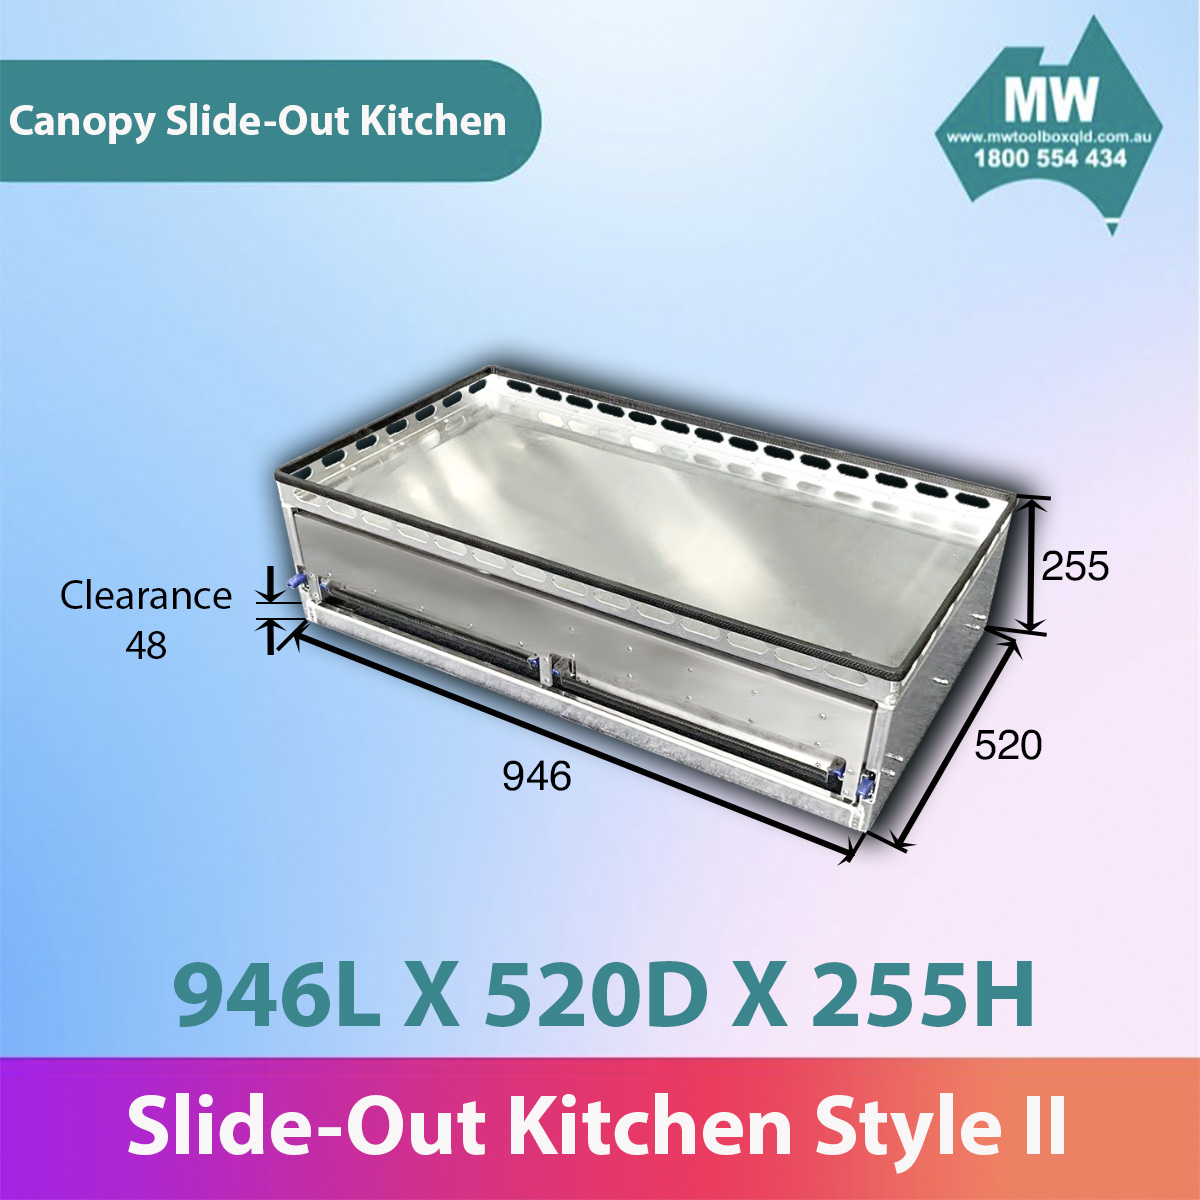 MW SLIDE OUT KITCHEN CANOPY KITCHEN STYLE II-5